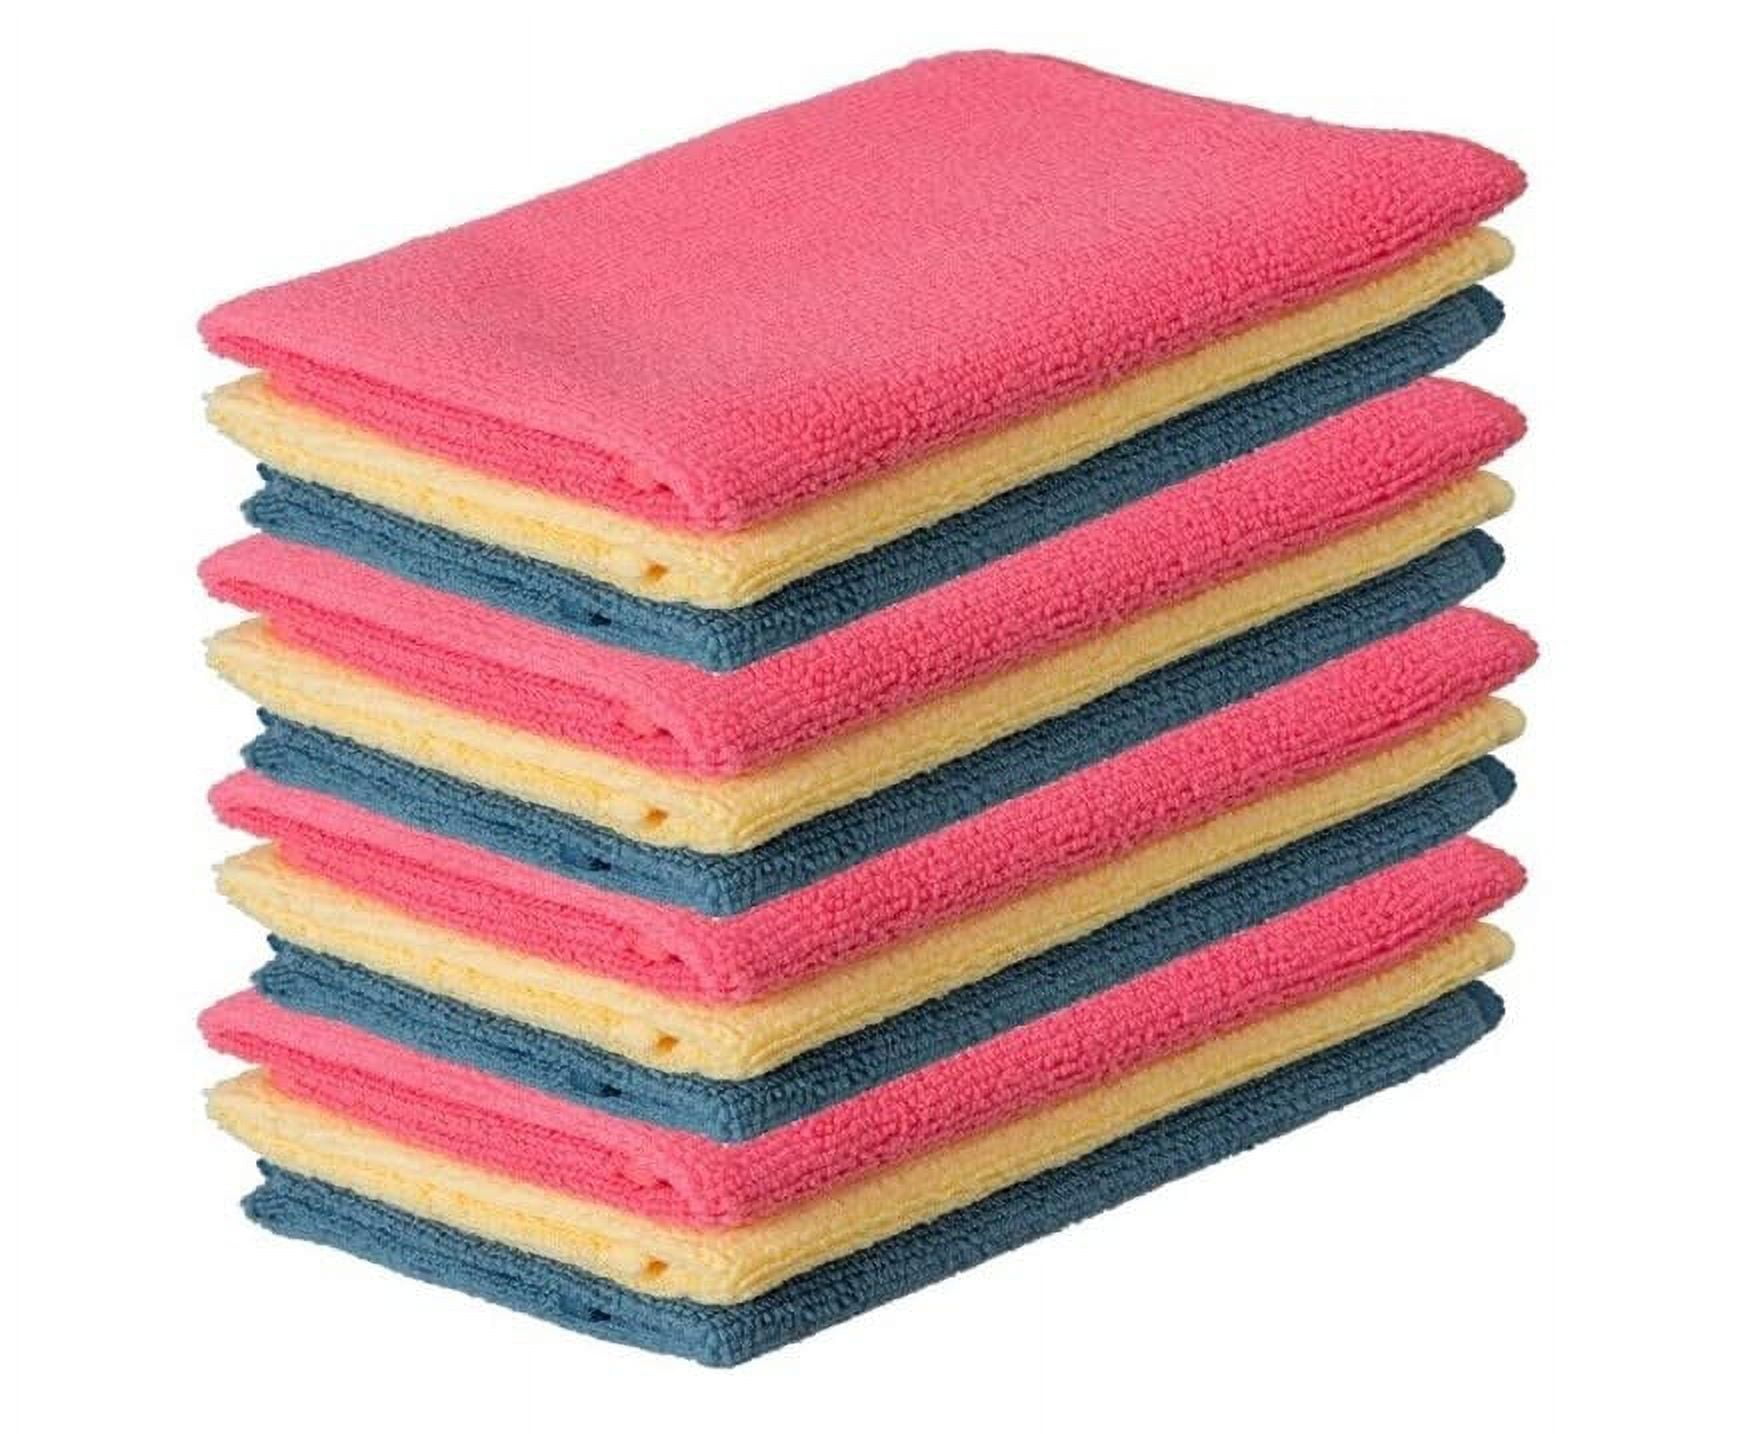 Vileda Professional | PVA Microfiber Cloth Red | All Purpose Cleaning  Shammy | Synthetic Chamois Towel | Smooth & Absorbent Materials | 5 Pack